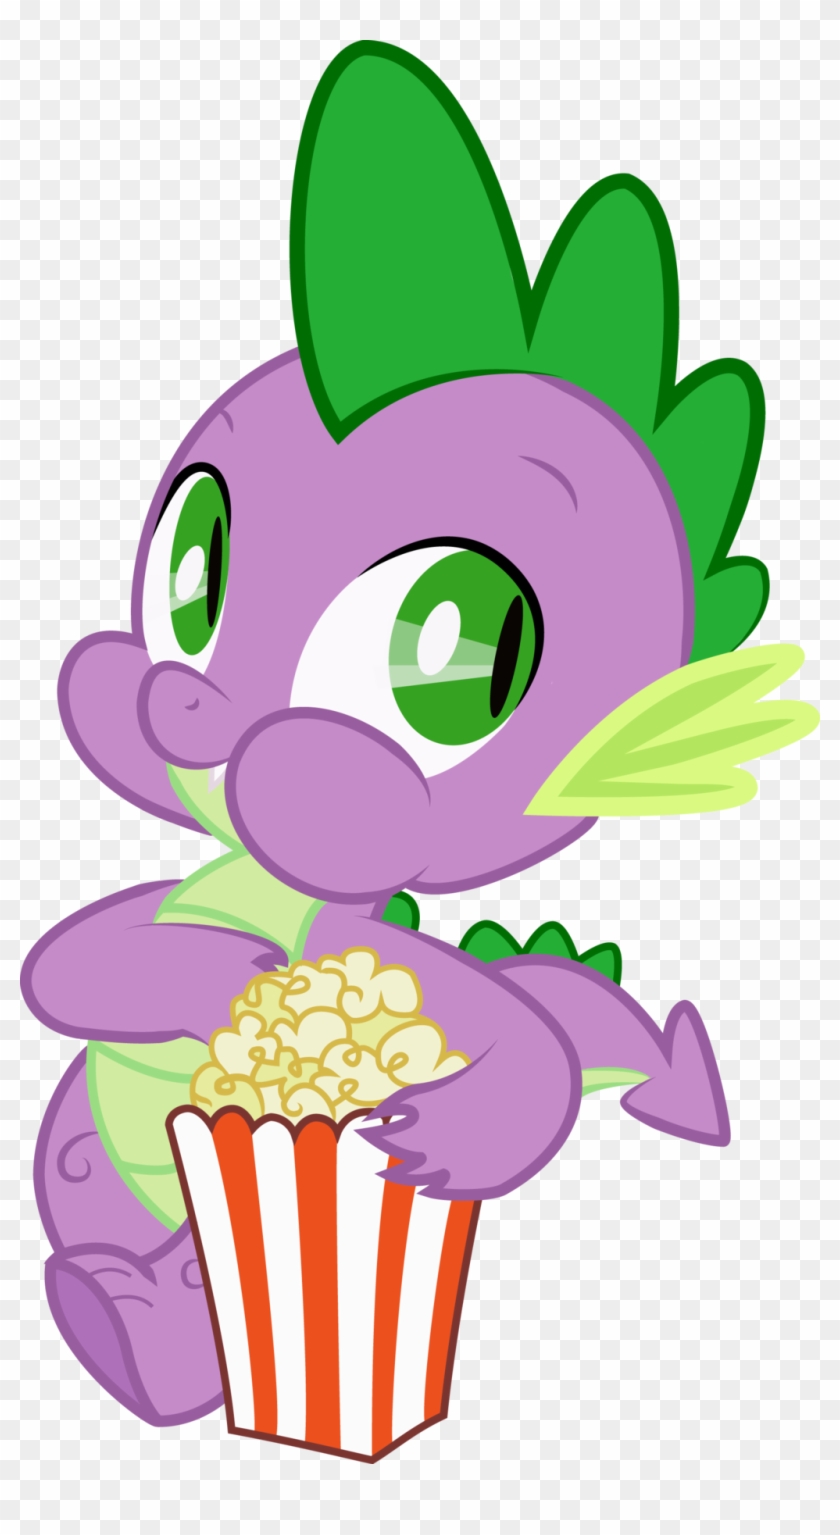 Unclescooter 35 3 Spike Eating Popcorn By Dangerousmoving - Spike Eating Popcorn #263696